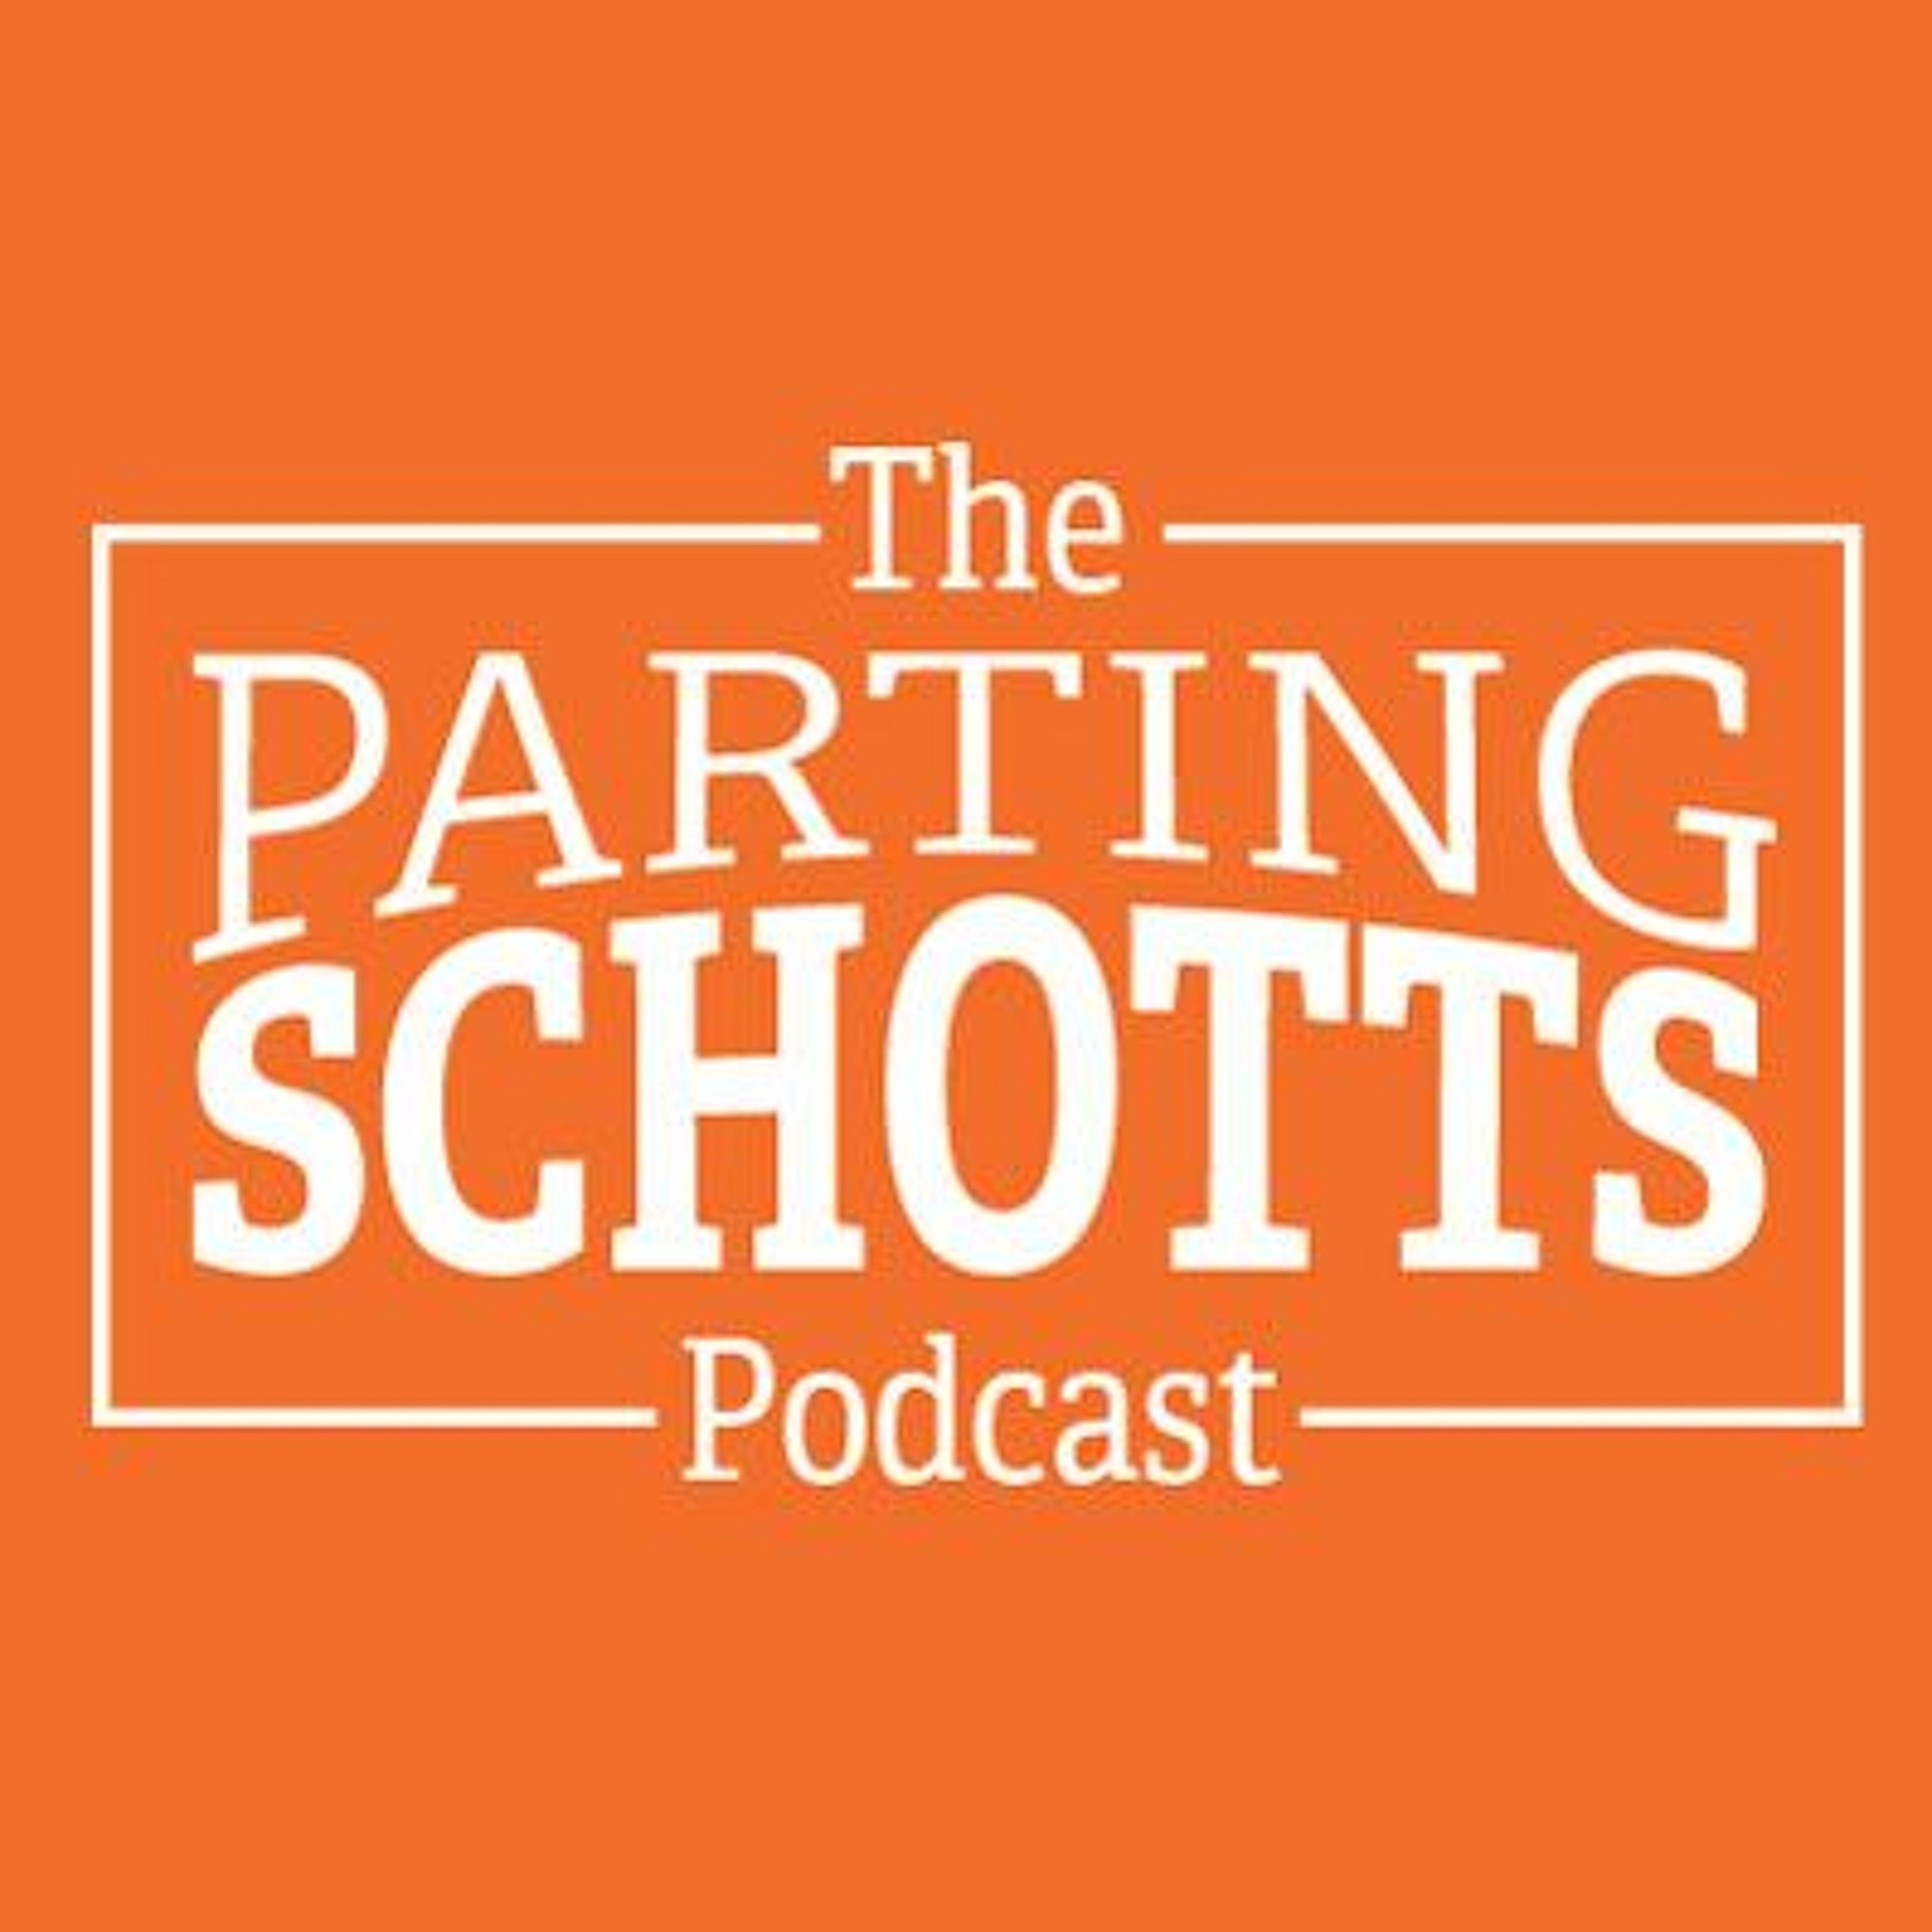 The Parting Schotts Podcast: UAlbany football, Trophecase, Saratoga and ESPN 40th anniversary